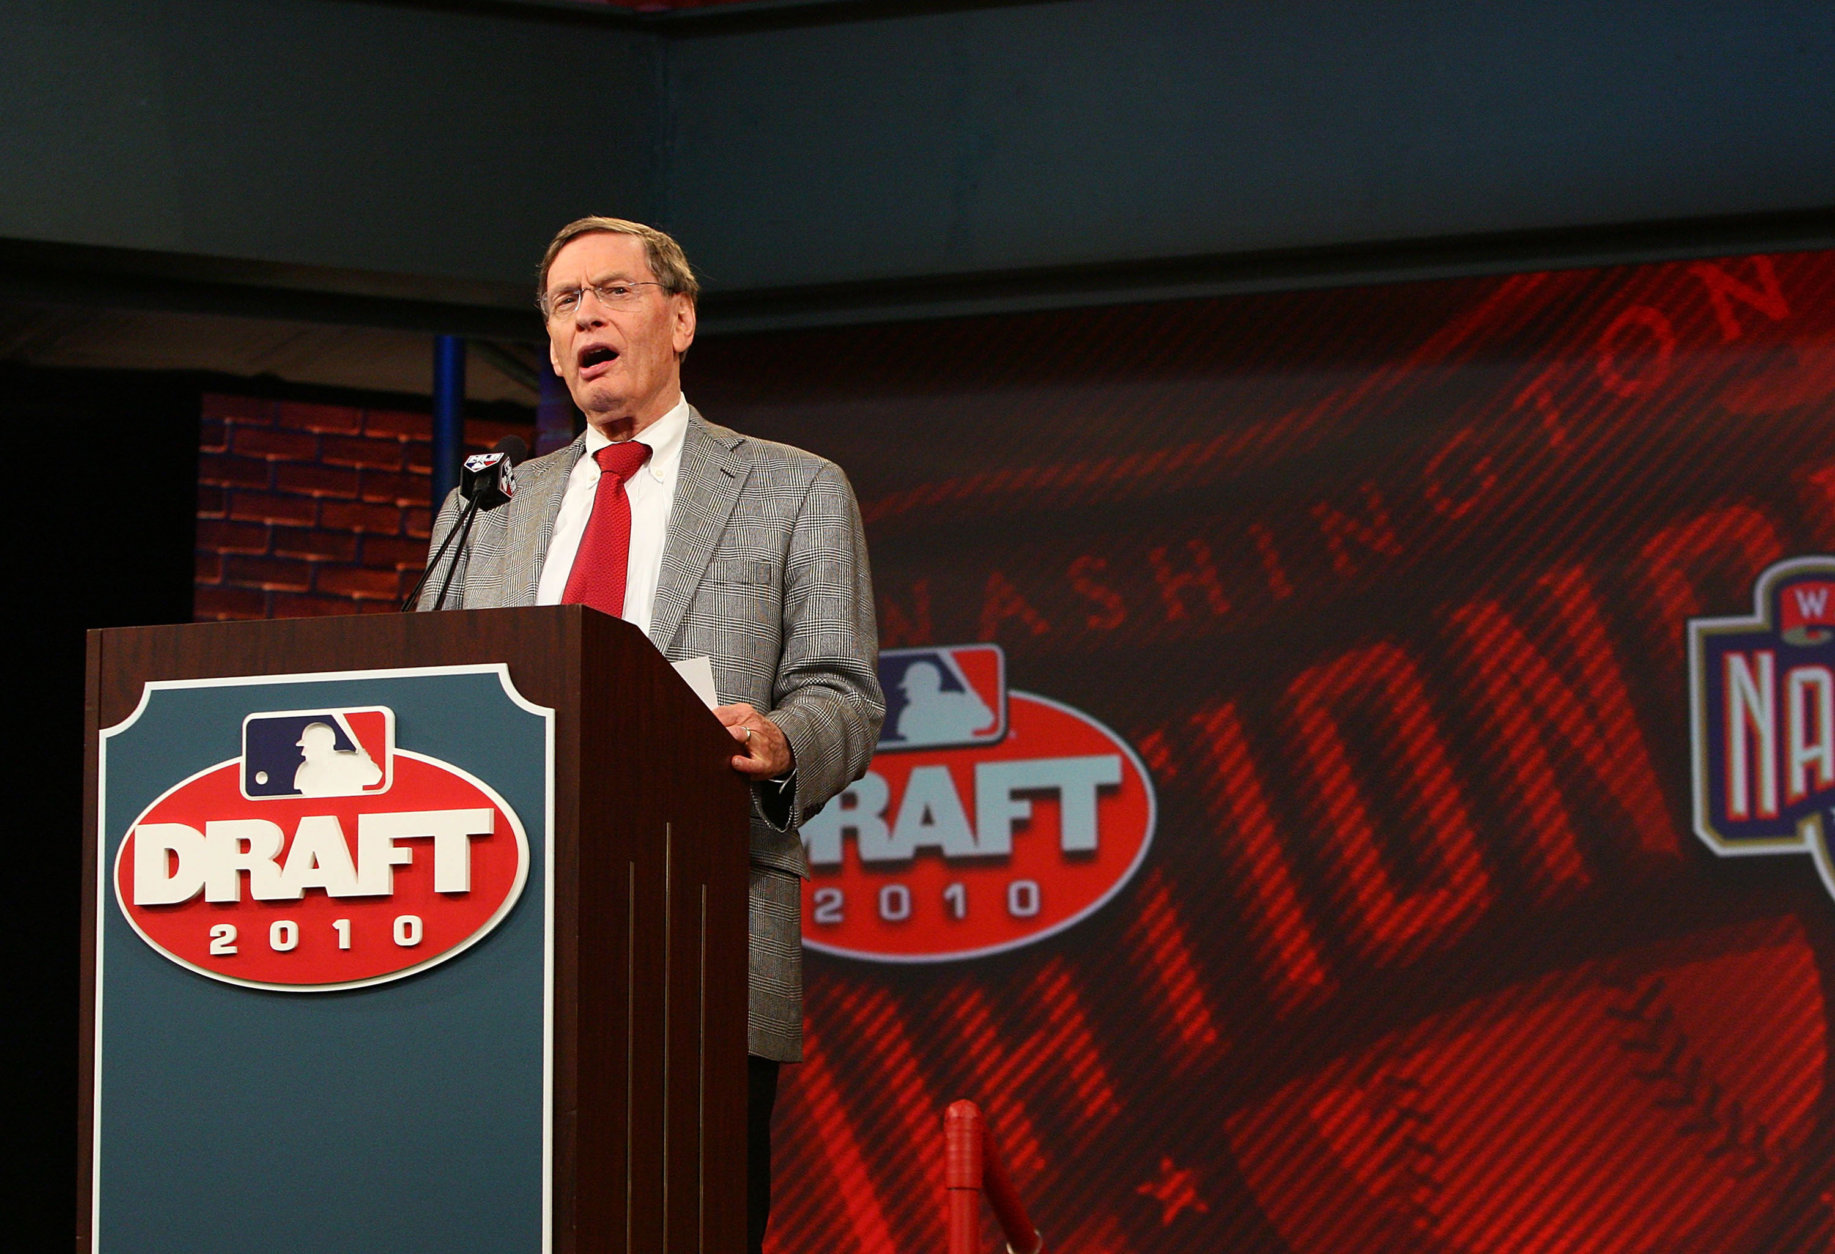 SECAUCUS, NJ - JUNE 07:  MLB commissioner Bud Selig announces Bryce Harper as the first overall pick to the Washington Nationals during the MLB First Year Player Draft on June 7, 2010 held in Studio 42 at the MLB Network in Secaucus, New Jersey.  (Photo by Mike Stobe/Getty Images)